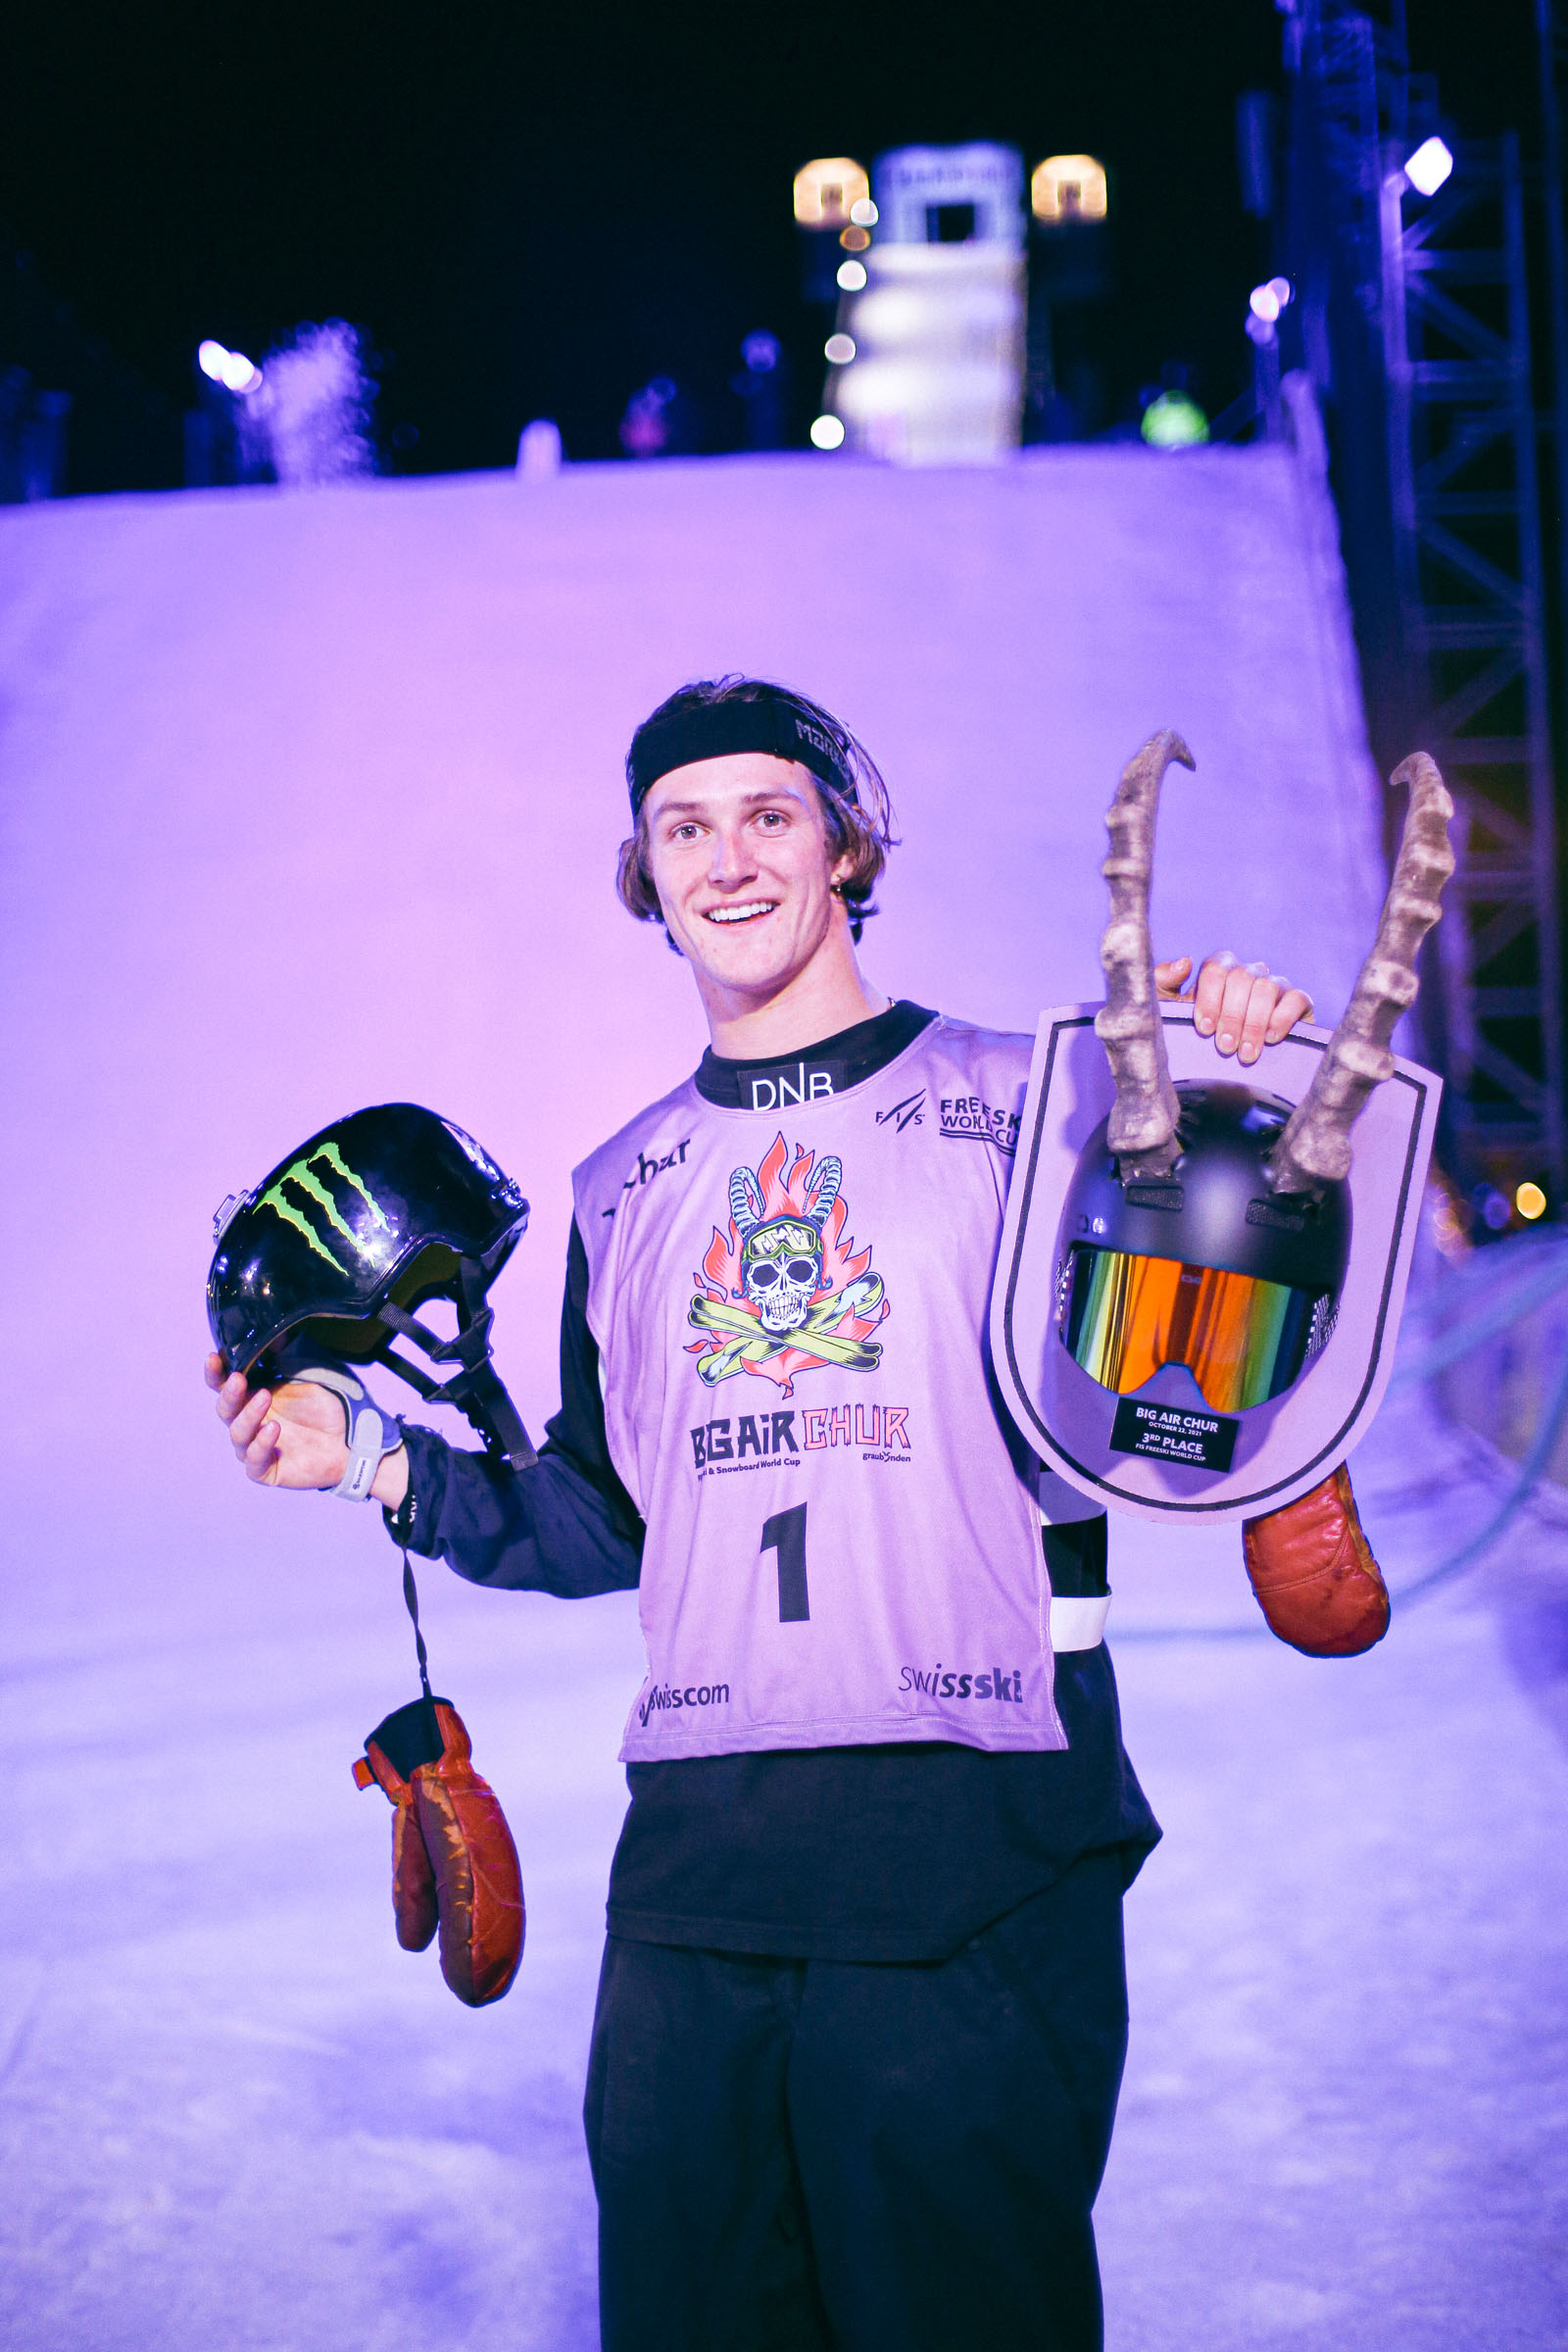 Monster Energy's Birk Ruud Will Compete in Men's Freeski Slopestyle and Big Air at X Games Aspen 2023